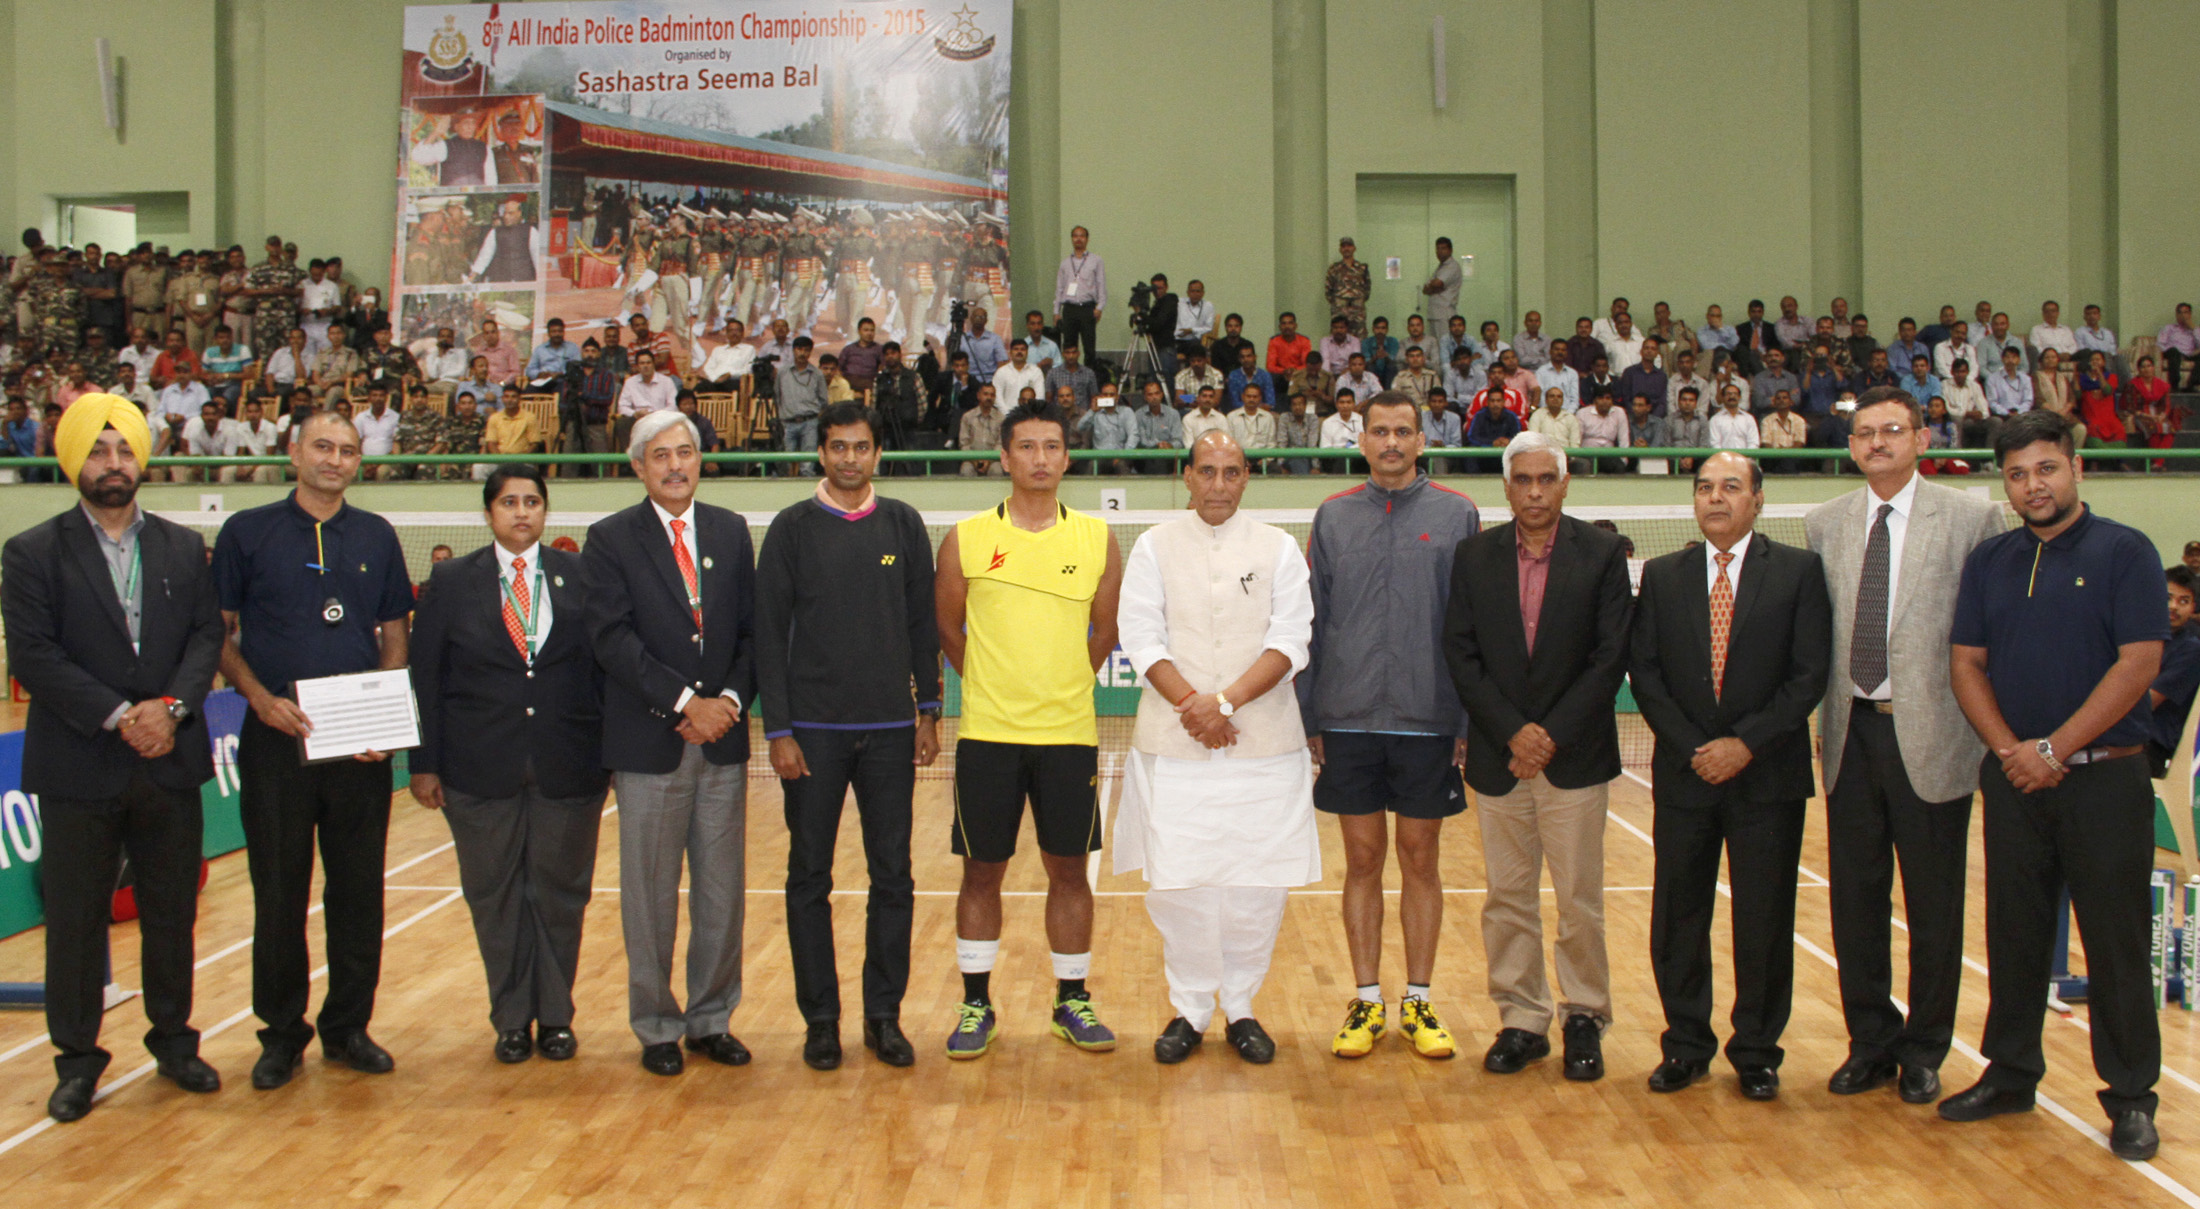 The Union Home Minister, Shri Rajnath Singh in a group photograph with the award winners, during the Closing Ceremony of the 8th All-India Police Badminton Championship-2015, in New Delhi on November 06, 2015.  	The Director General, Sashastra Seema Bal, Shri B.D. Sharma is also seen.